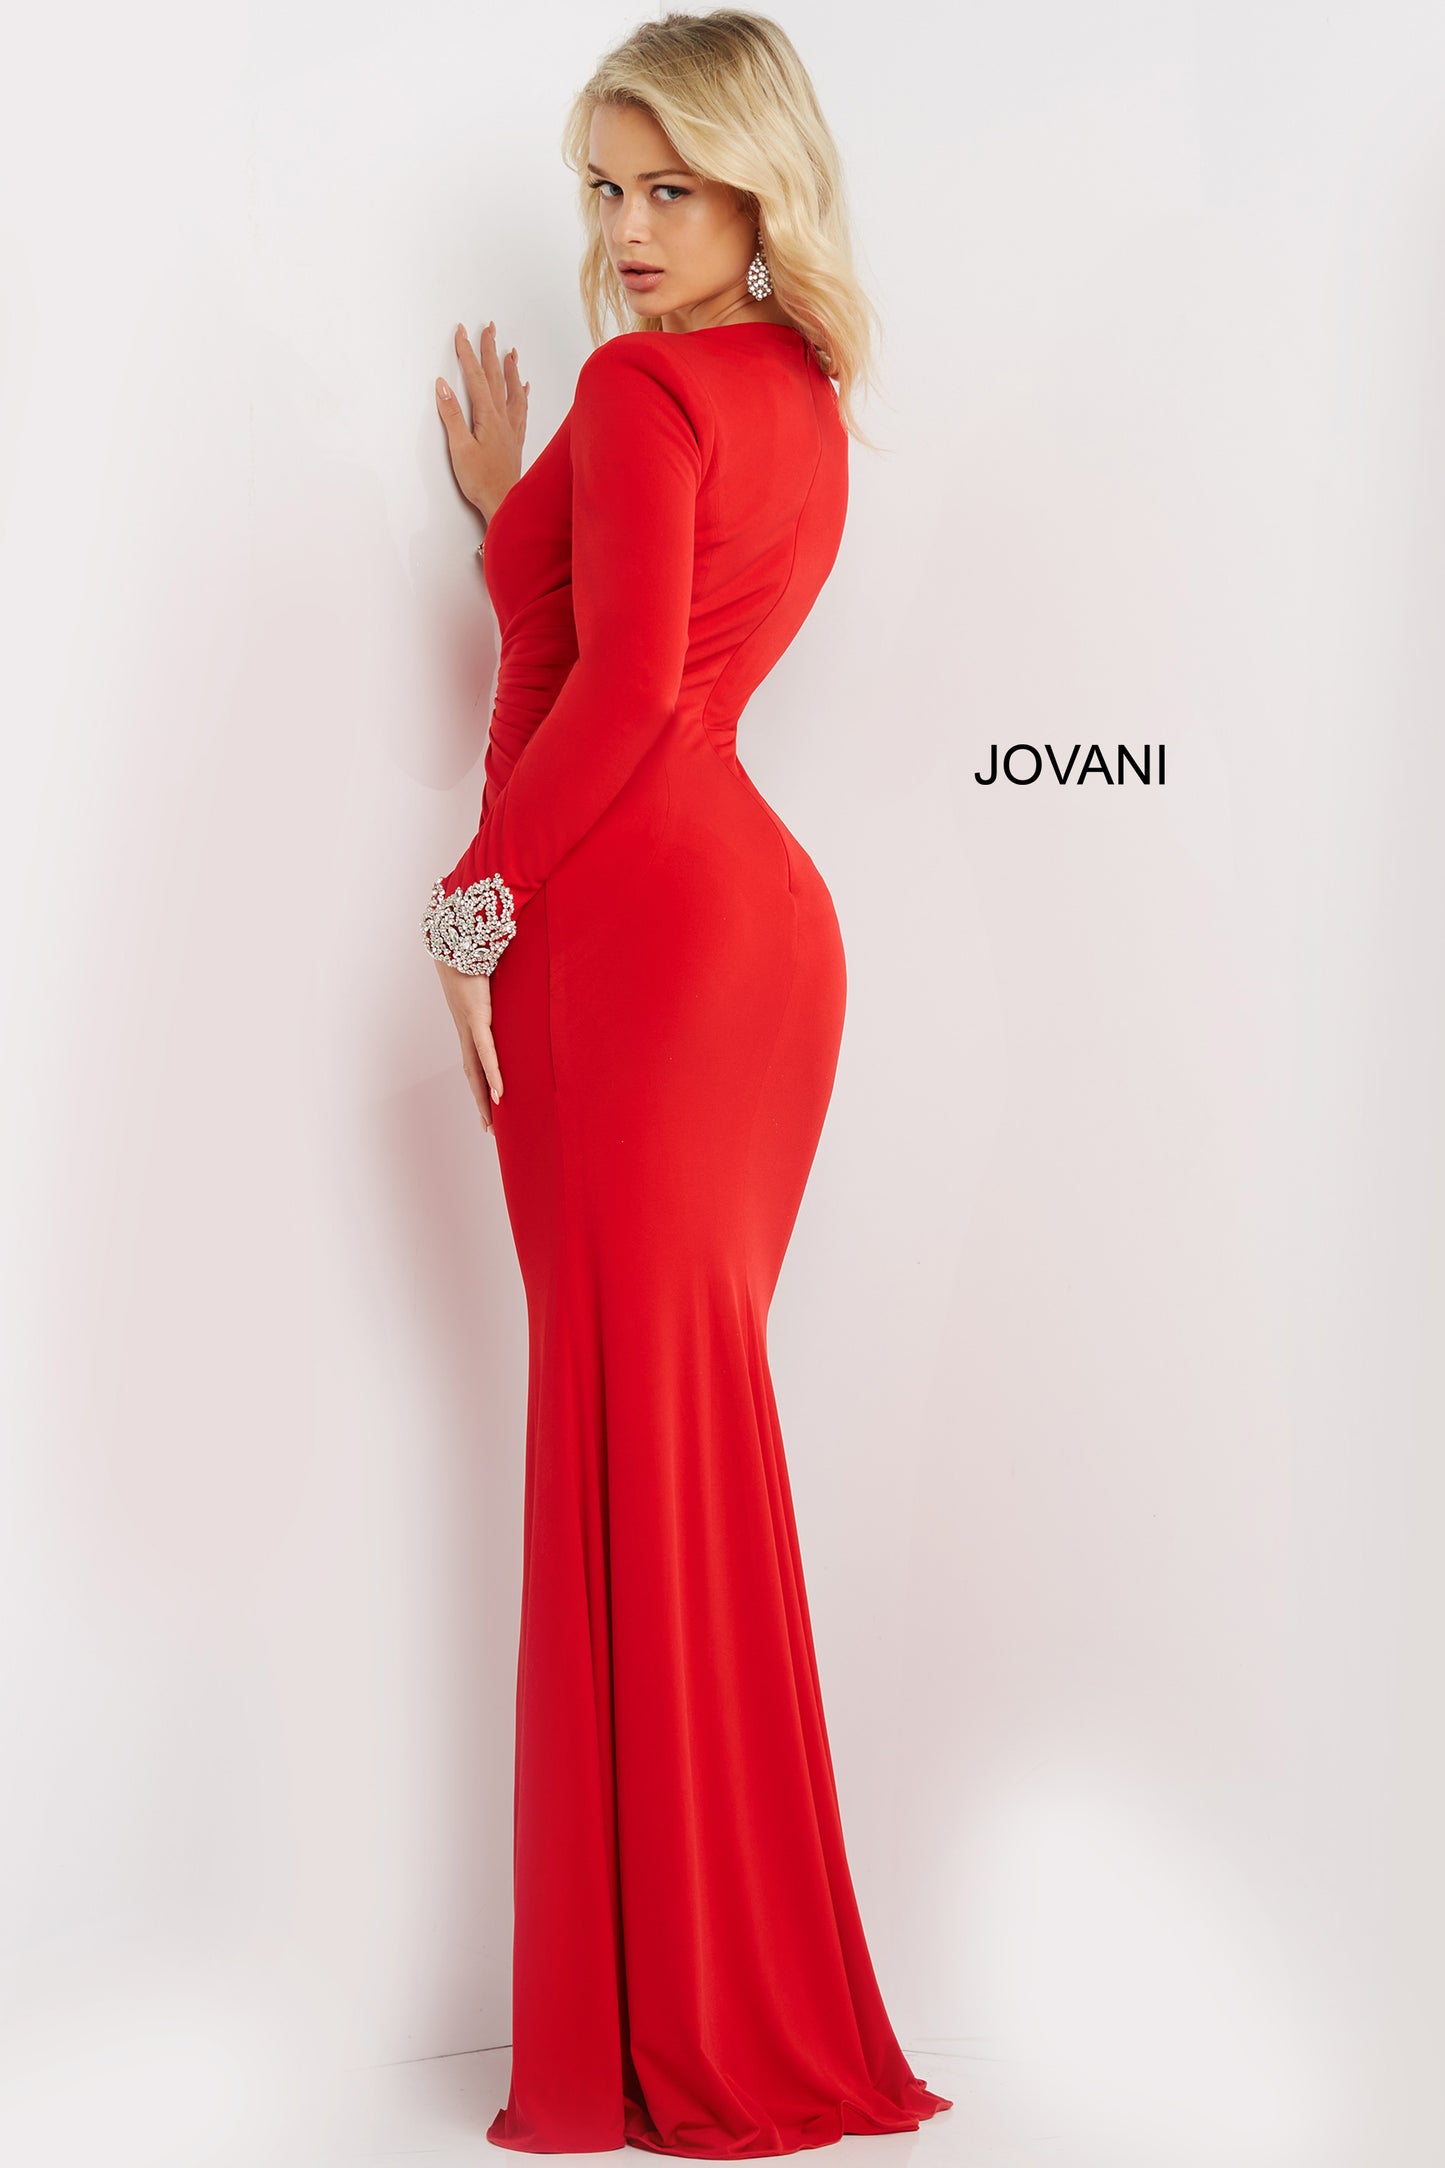 Jovani 07320 Long Straight Prom Pageant Gown long sleeve dress formal  Available Size- 00-24  Available Color- Red, Black, White